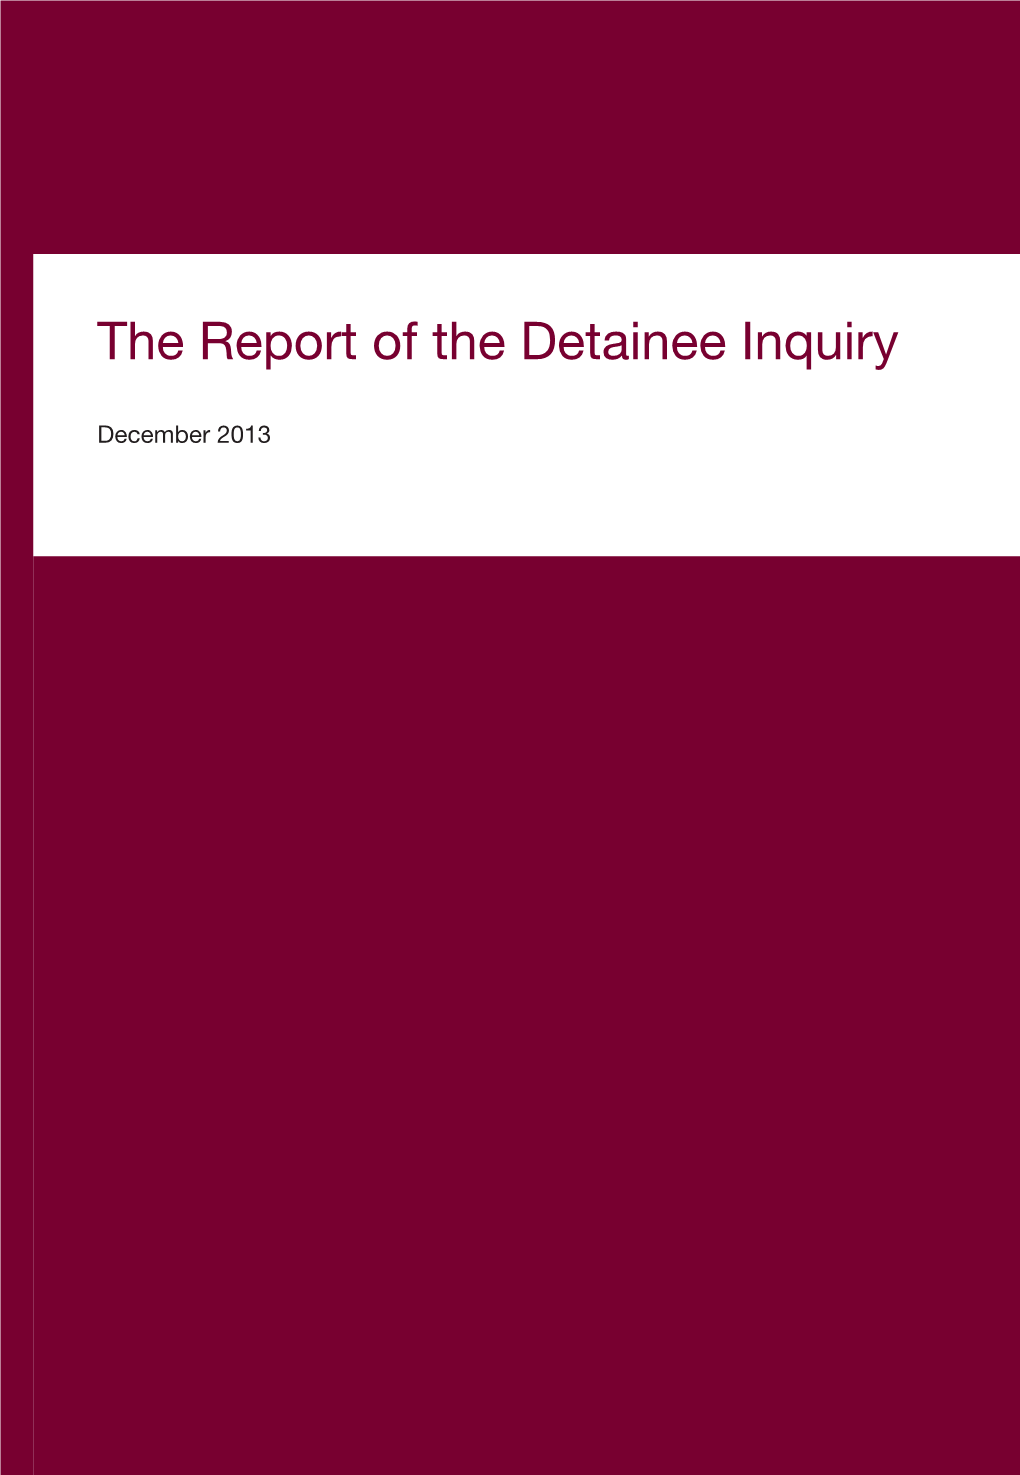 The Report of the Detainee Inquiry